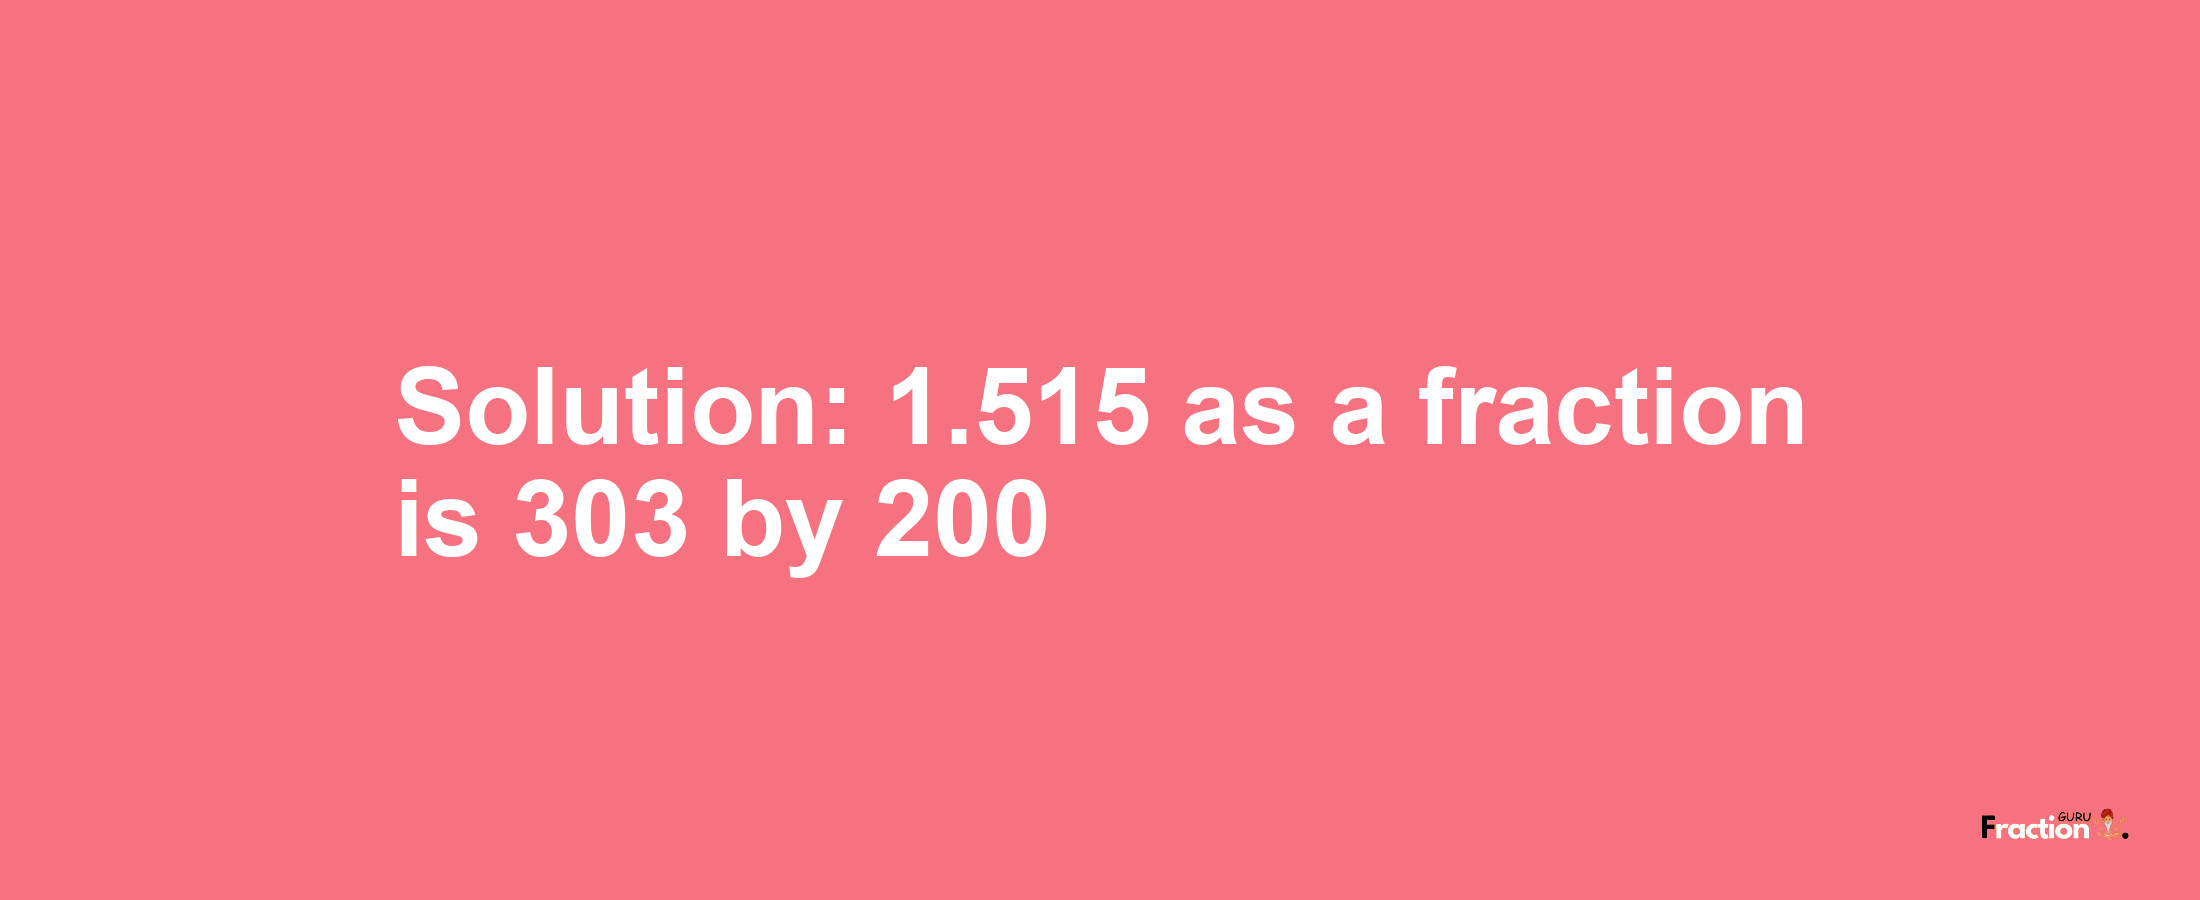 Solution:1.515 as a fraction is 303/200